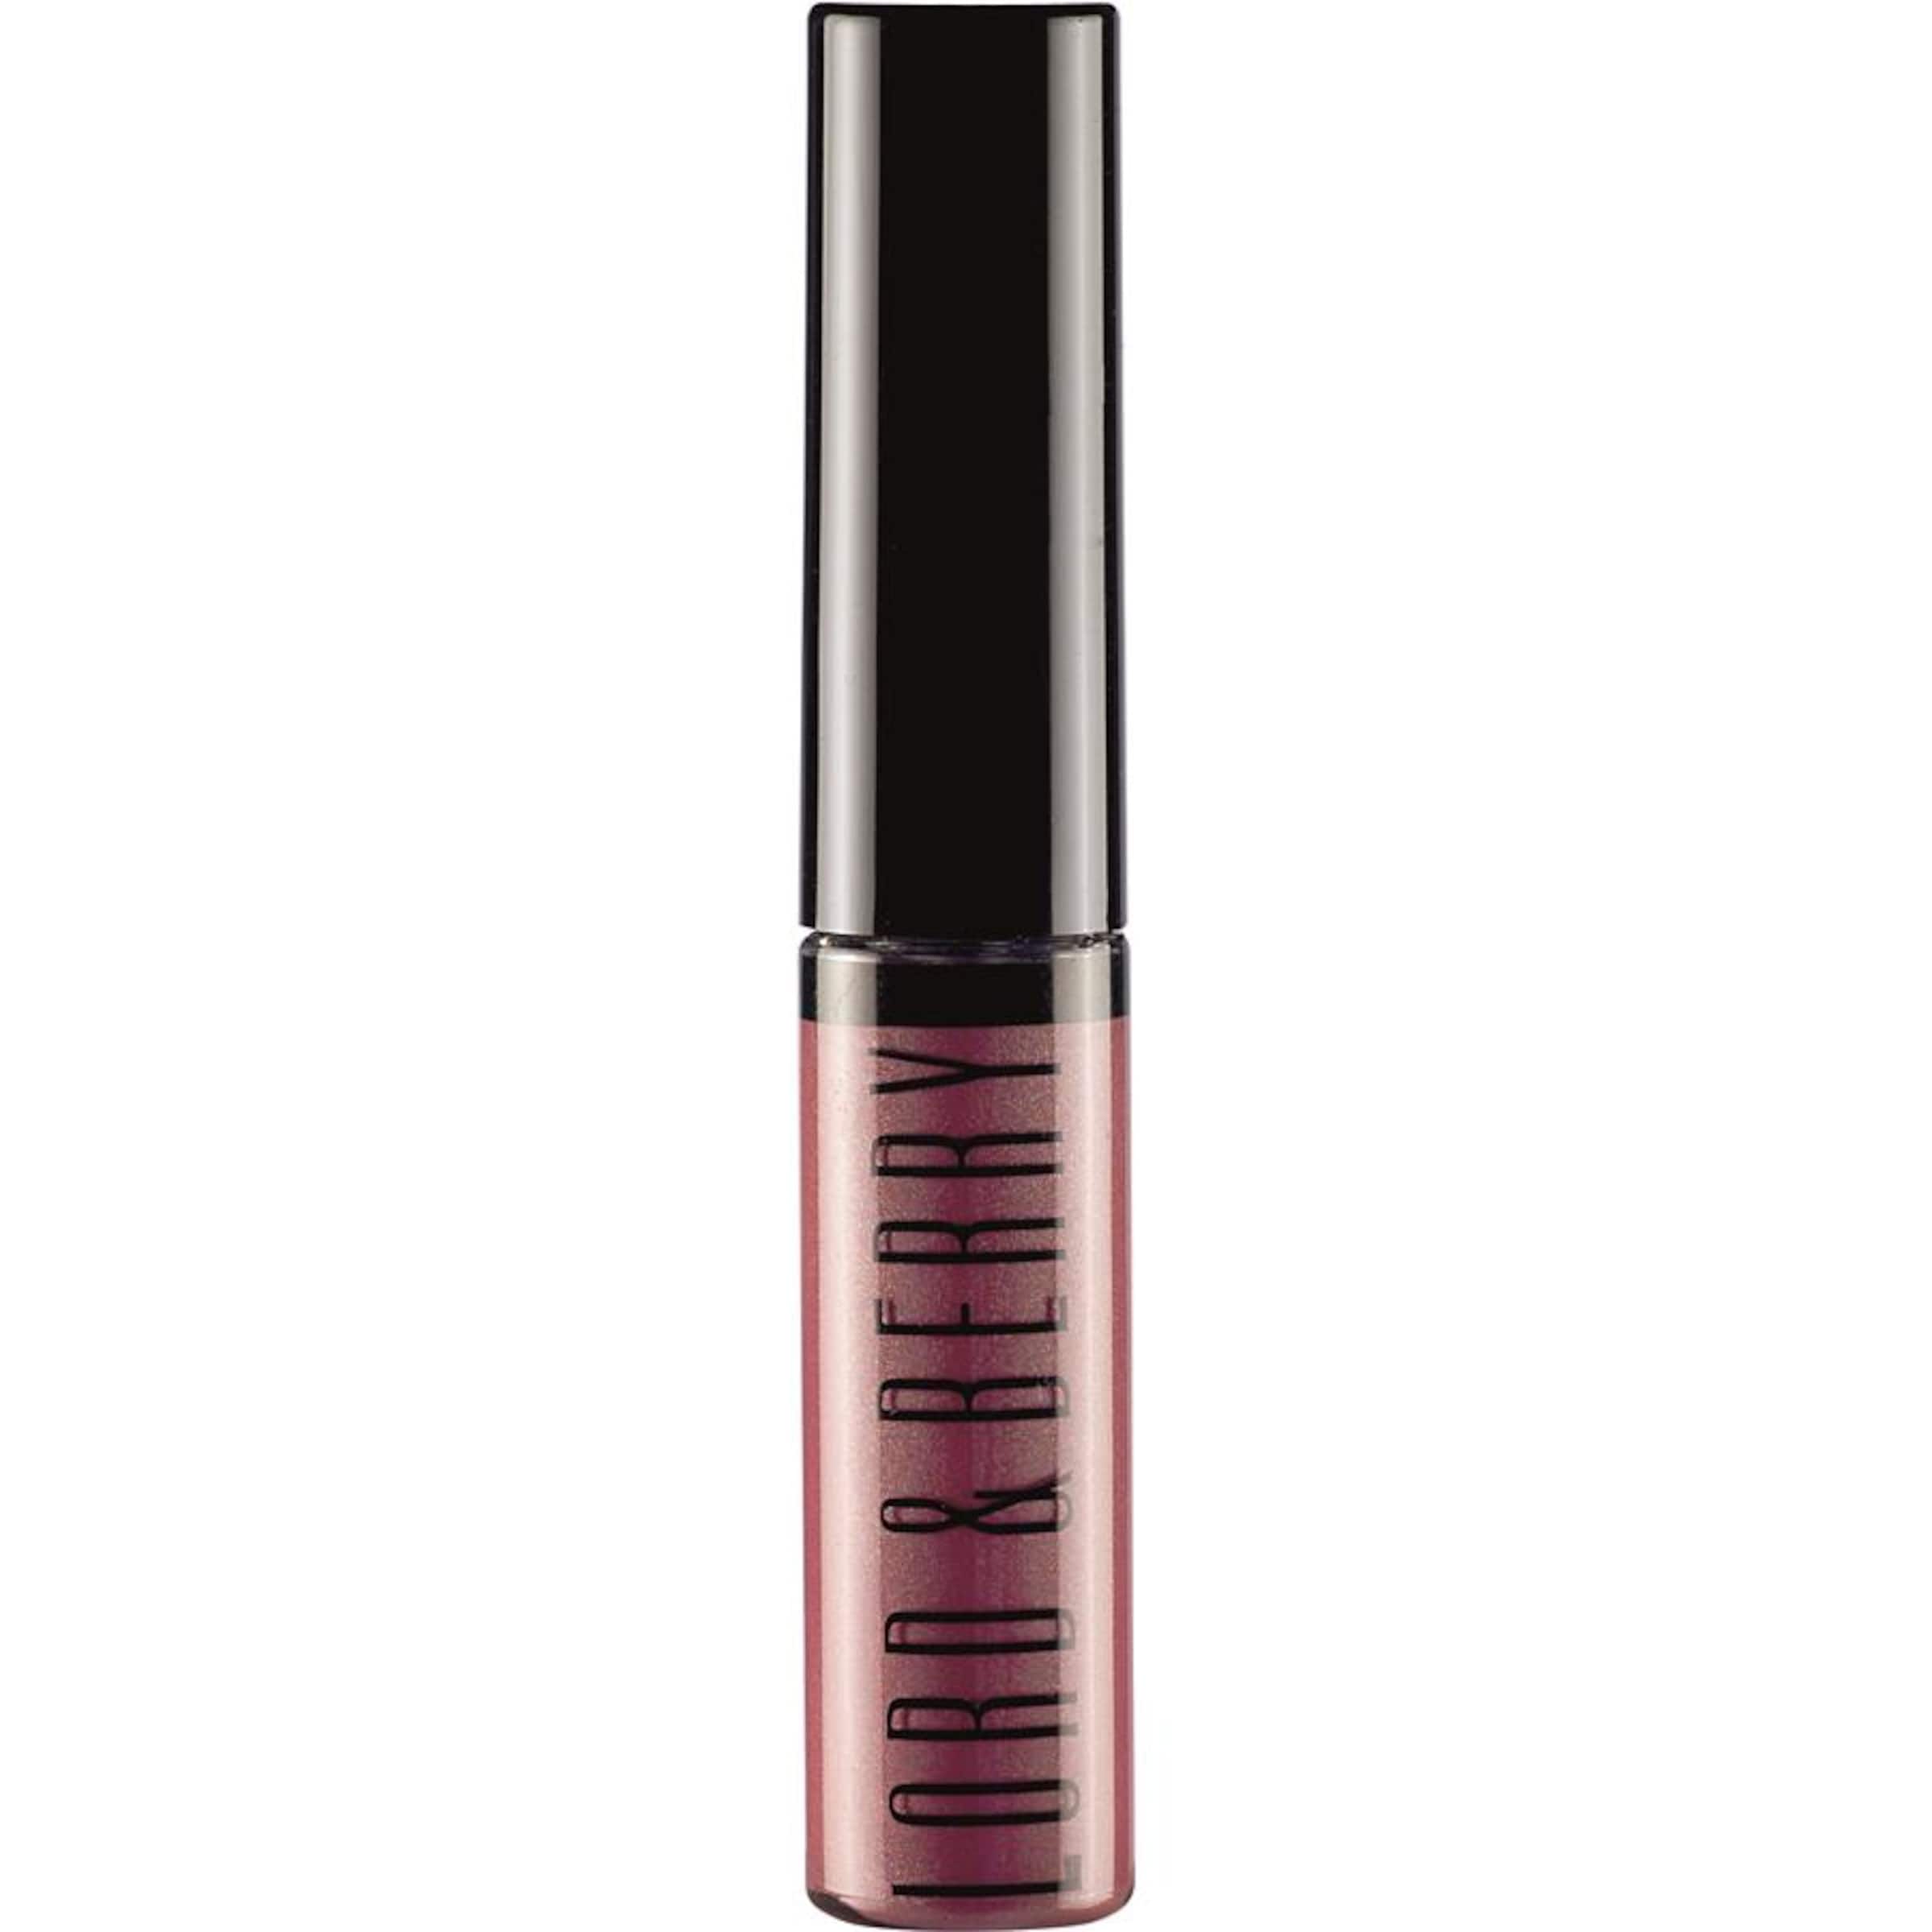 Lord & Berry Lipgloss Skin in Bronze 